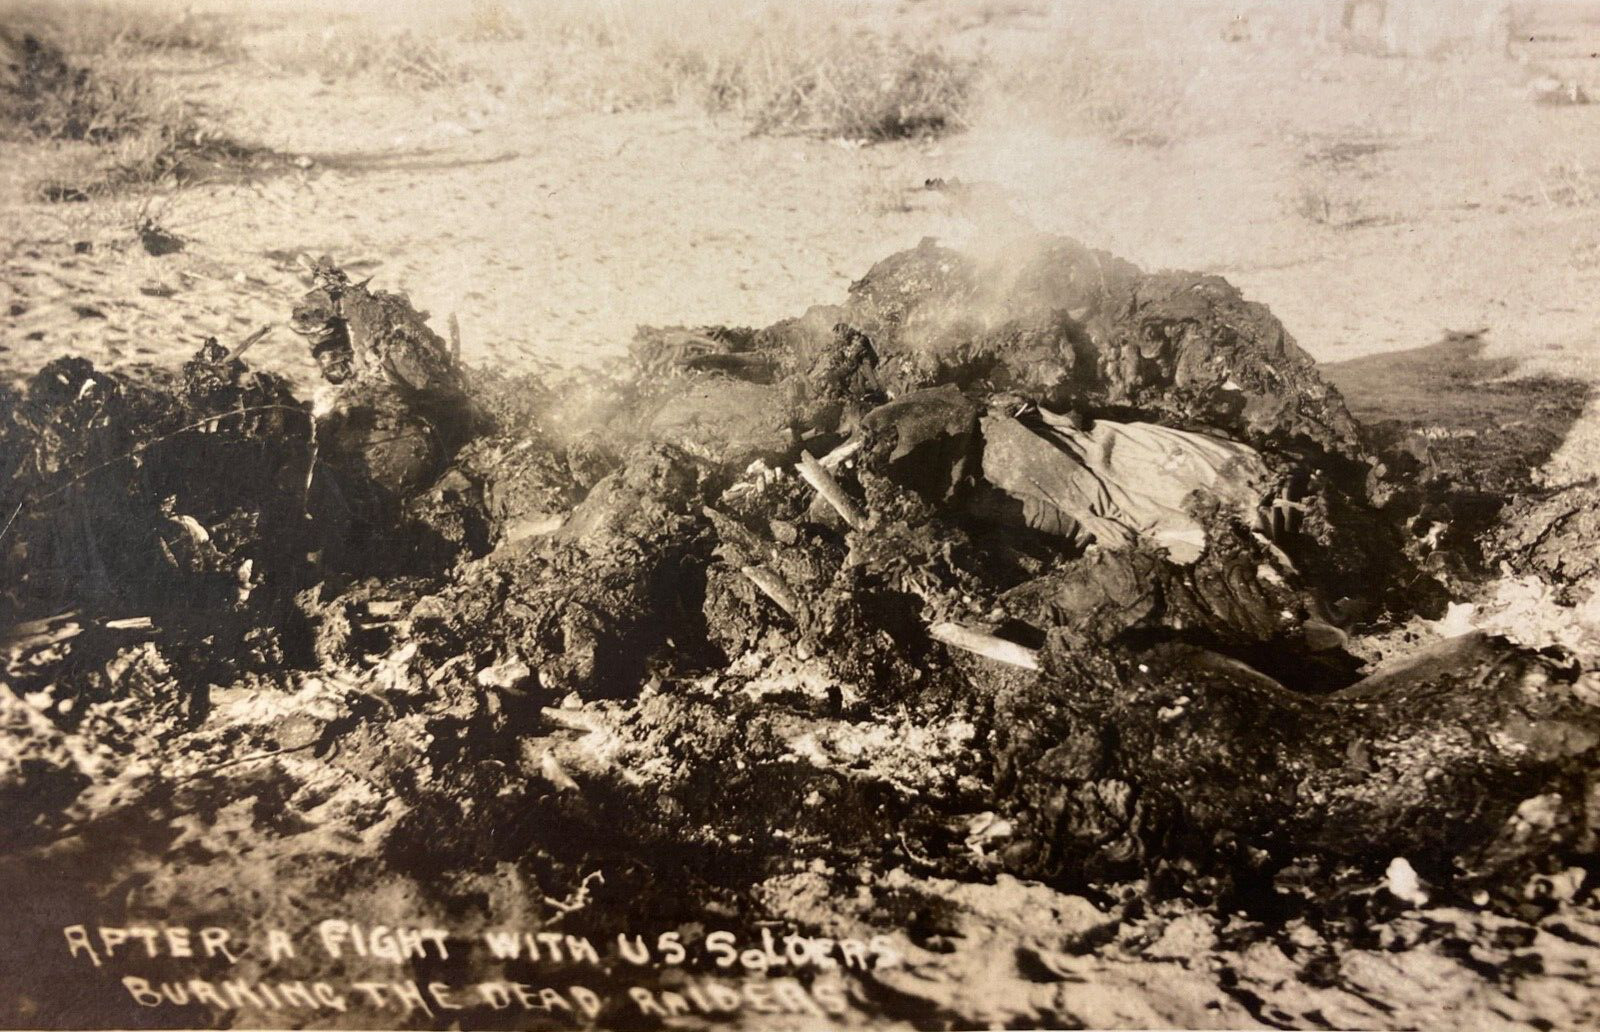 1918 RPPC: WWI BURNING THE DEAD antique real photograph postcard AFTER THE FIGHT